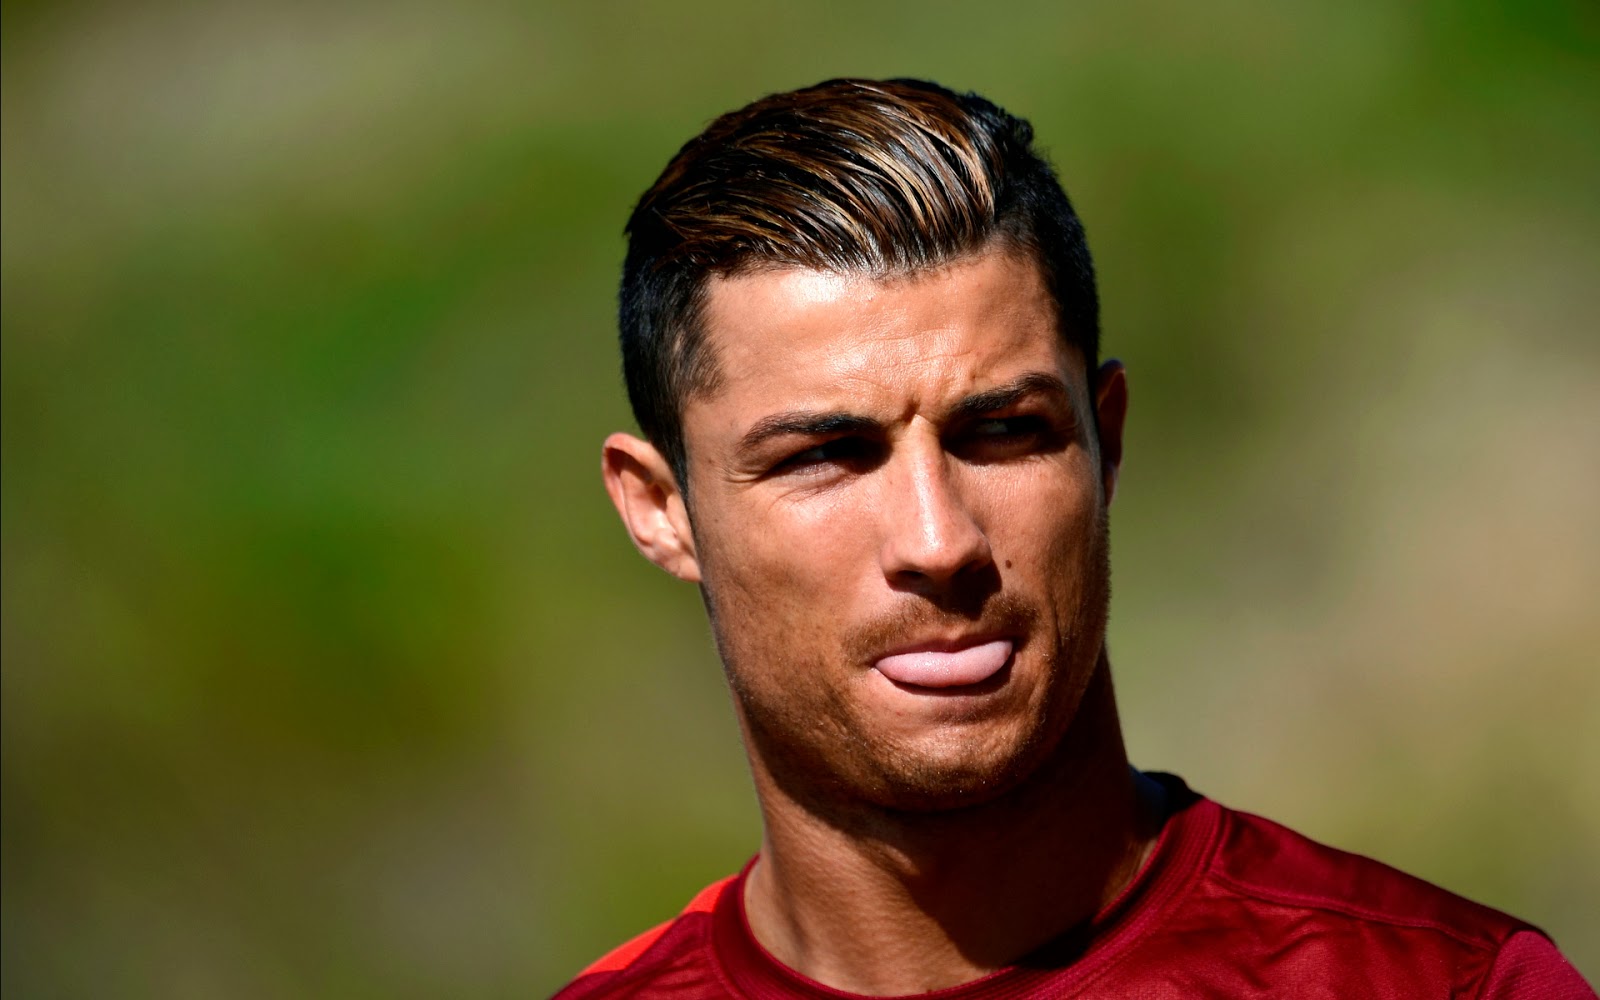 Gods own country -KERALA: CR7 HAIR STYLES